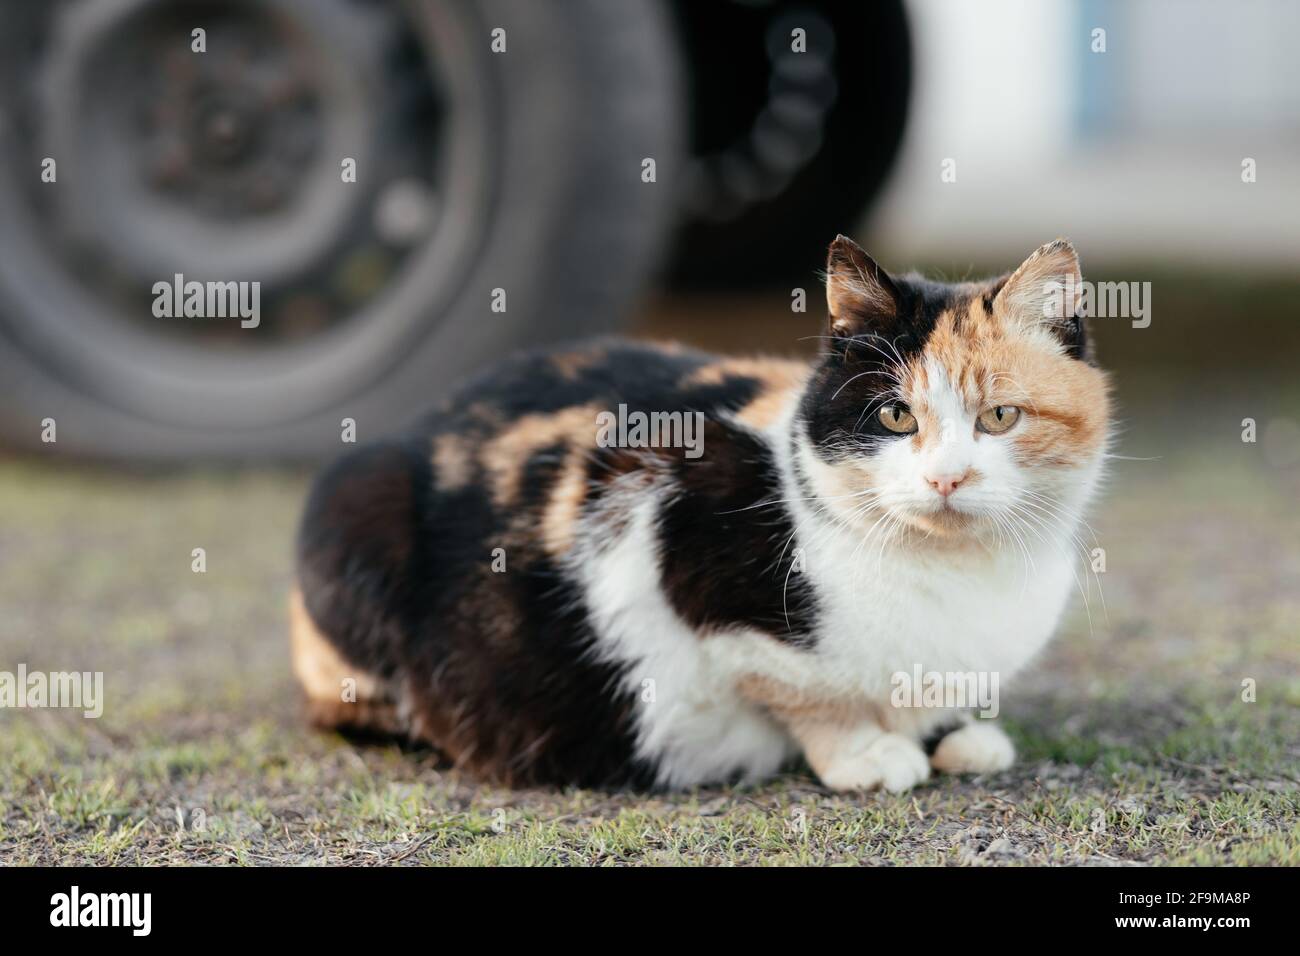 The cat sits on the background of a car wheel Stock Photo